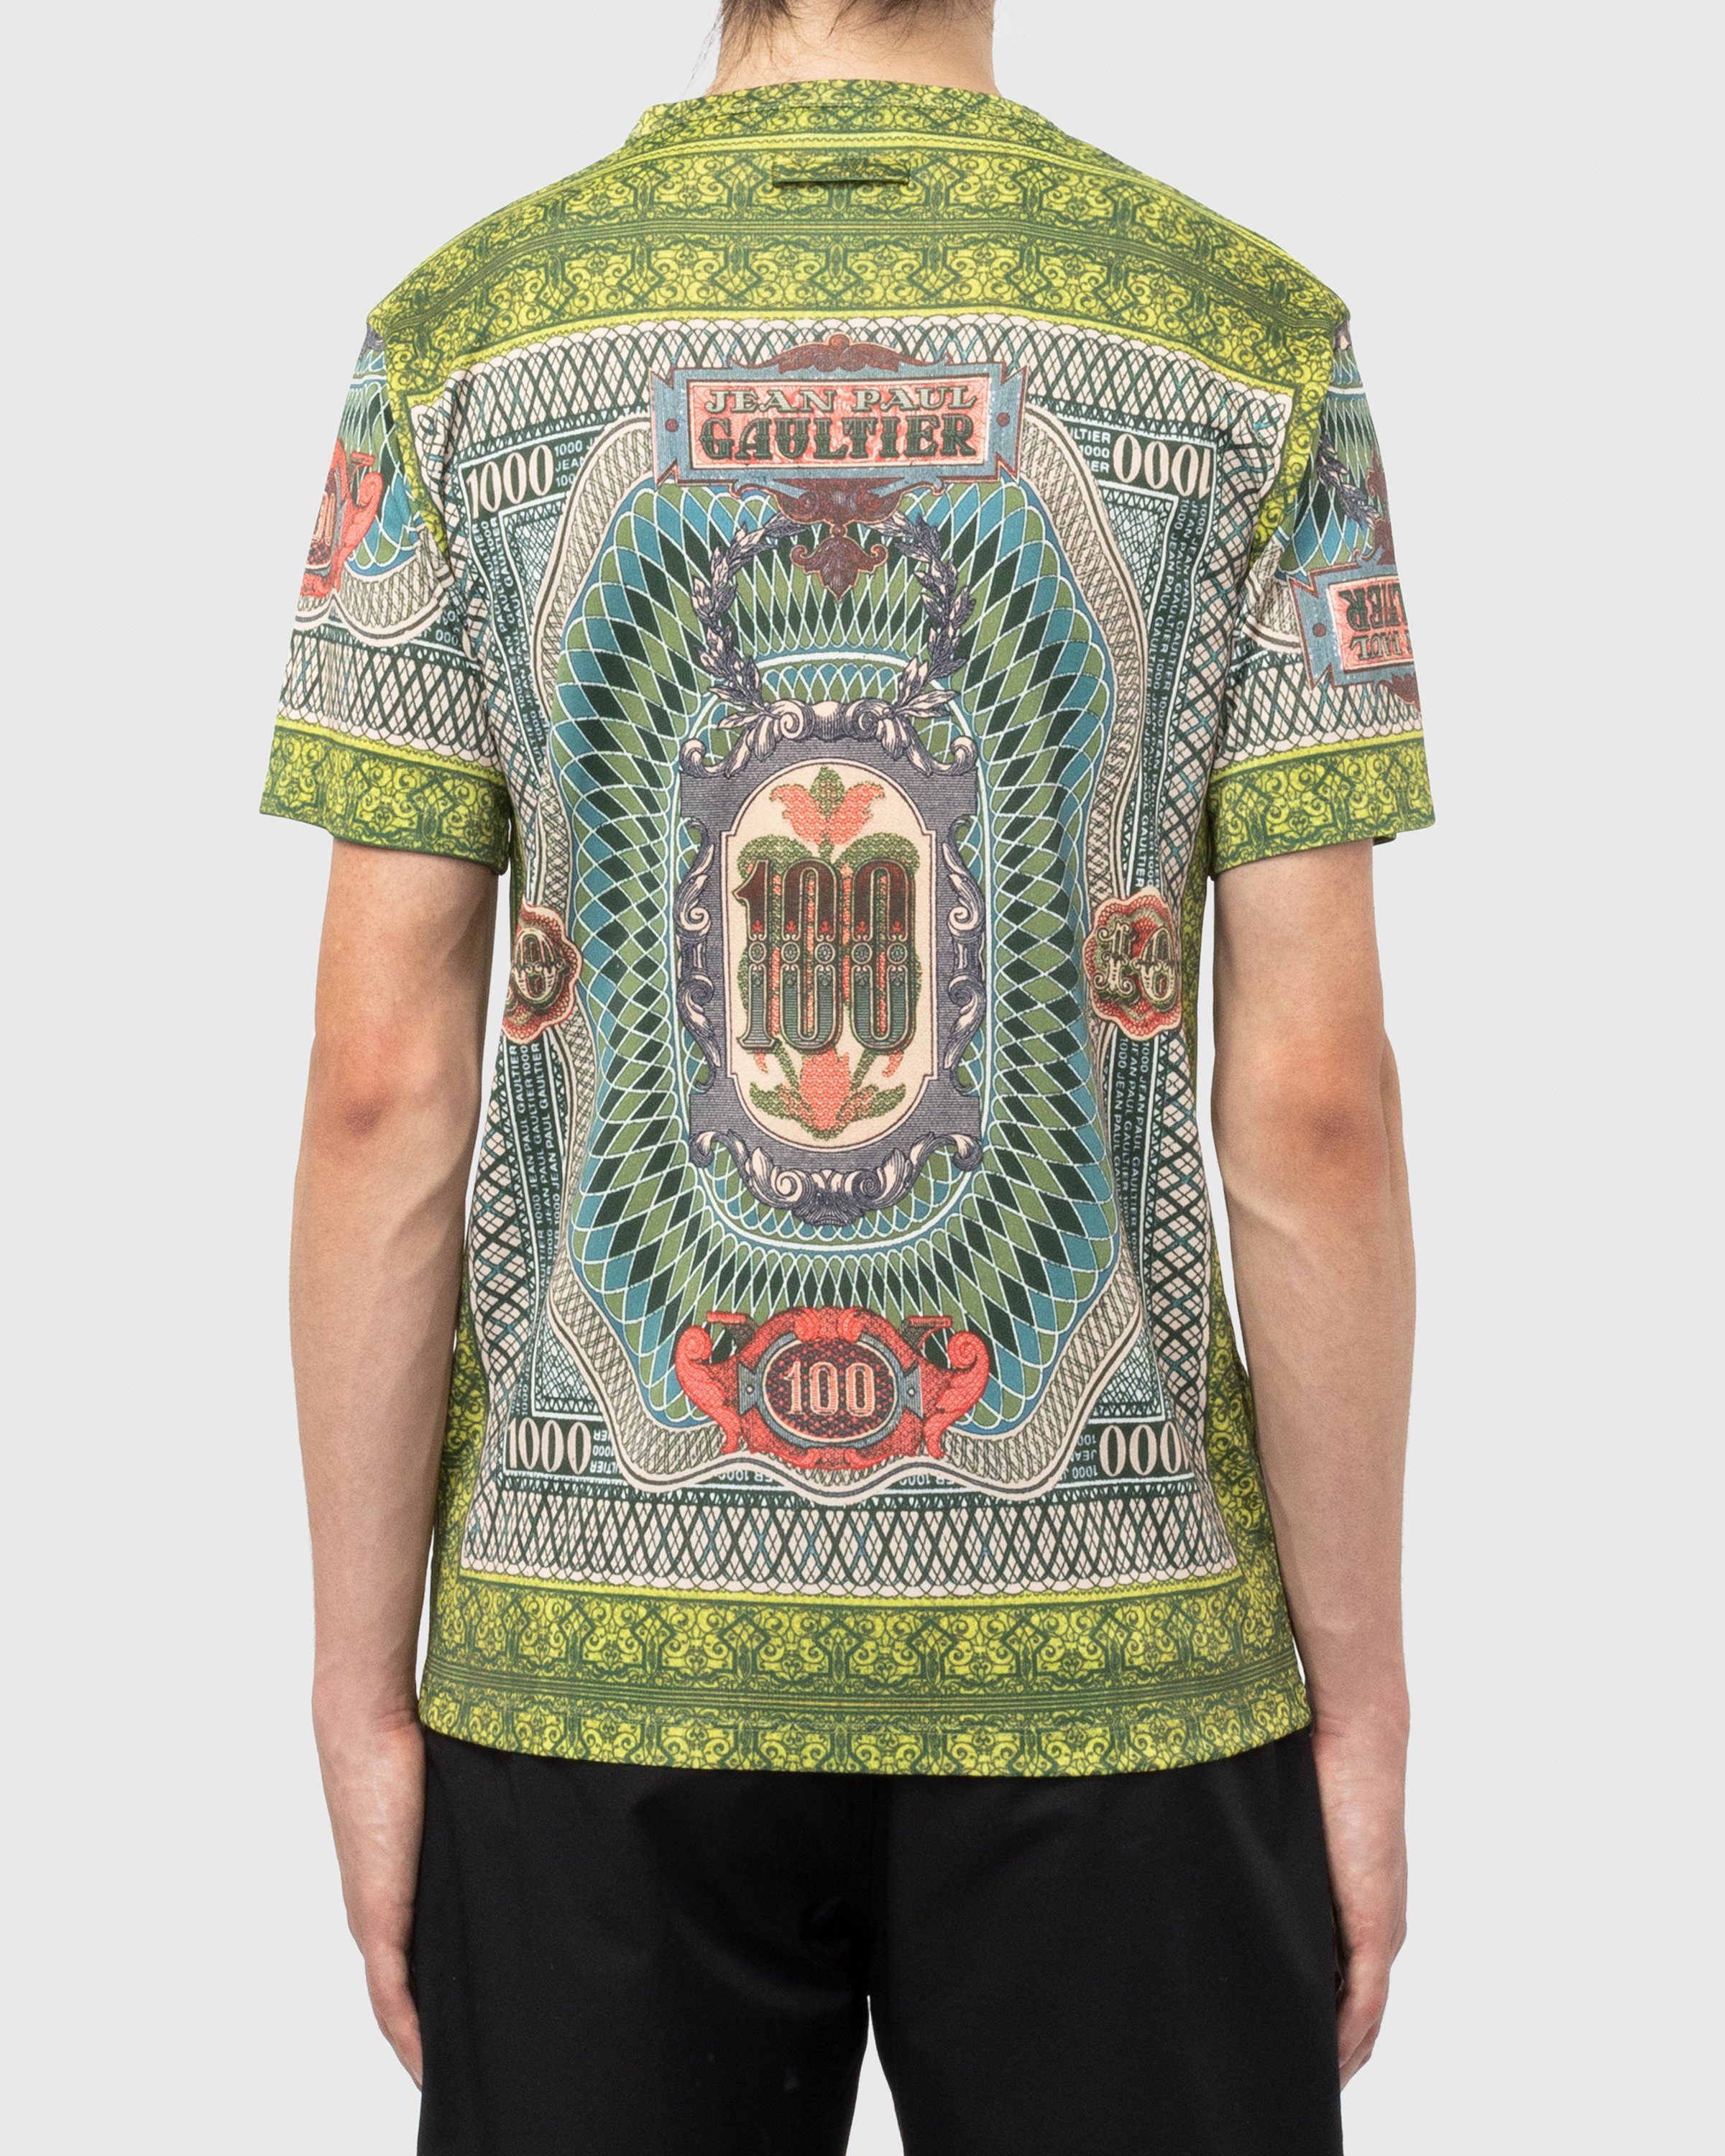 Jean Paul Gaultier - Banknote T-Shirt Multi - Clothing - Green - Image 3